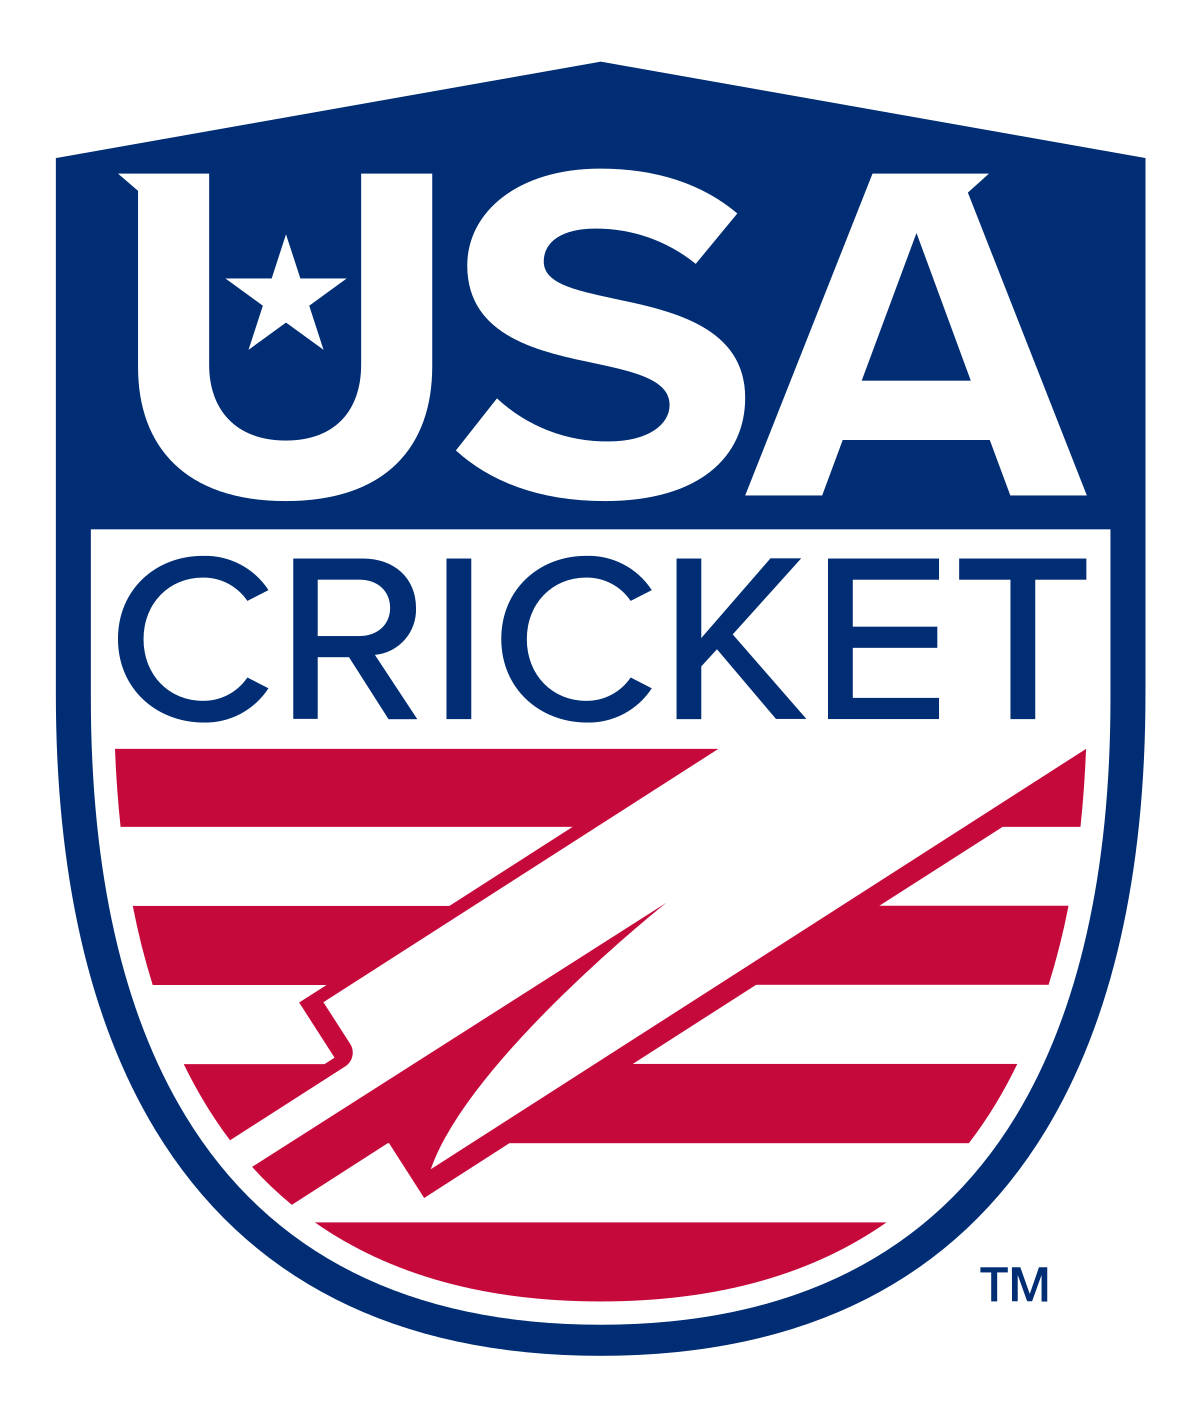 USA Cricket aka USAC is the governing body of cricket in the United States of America.